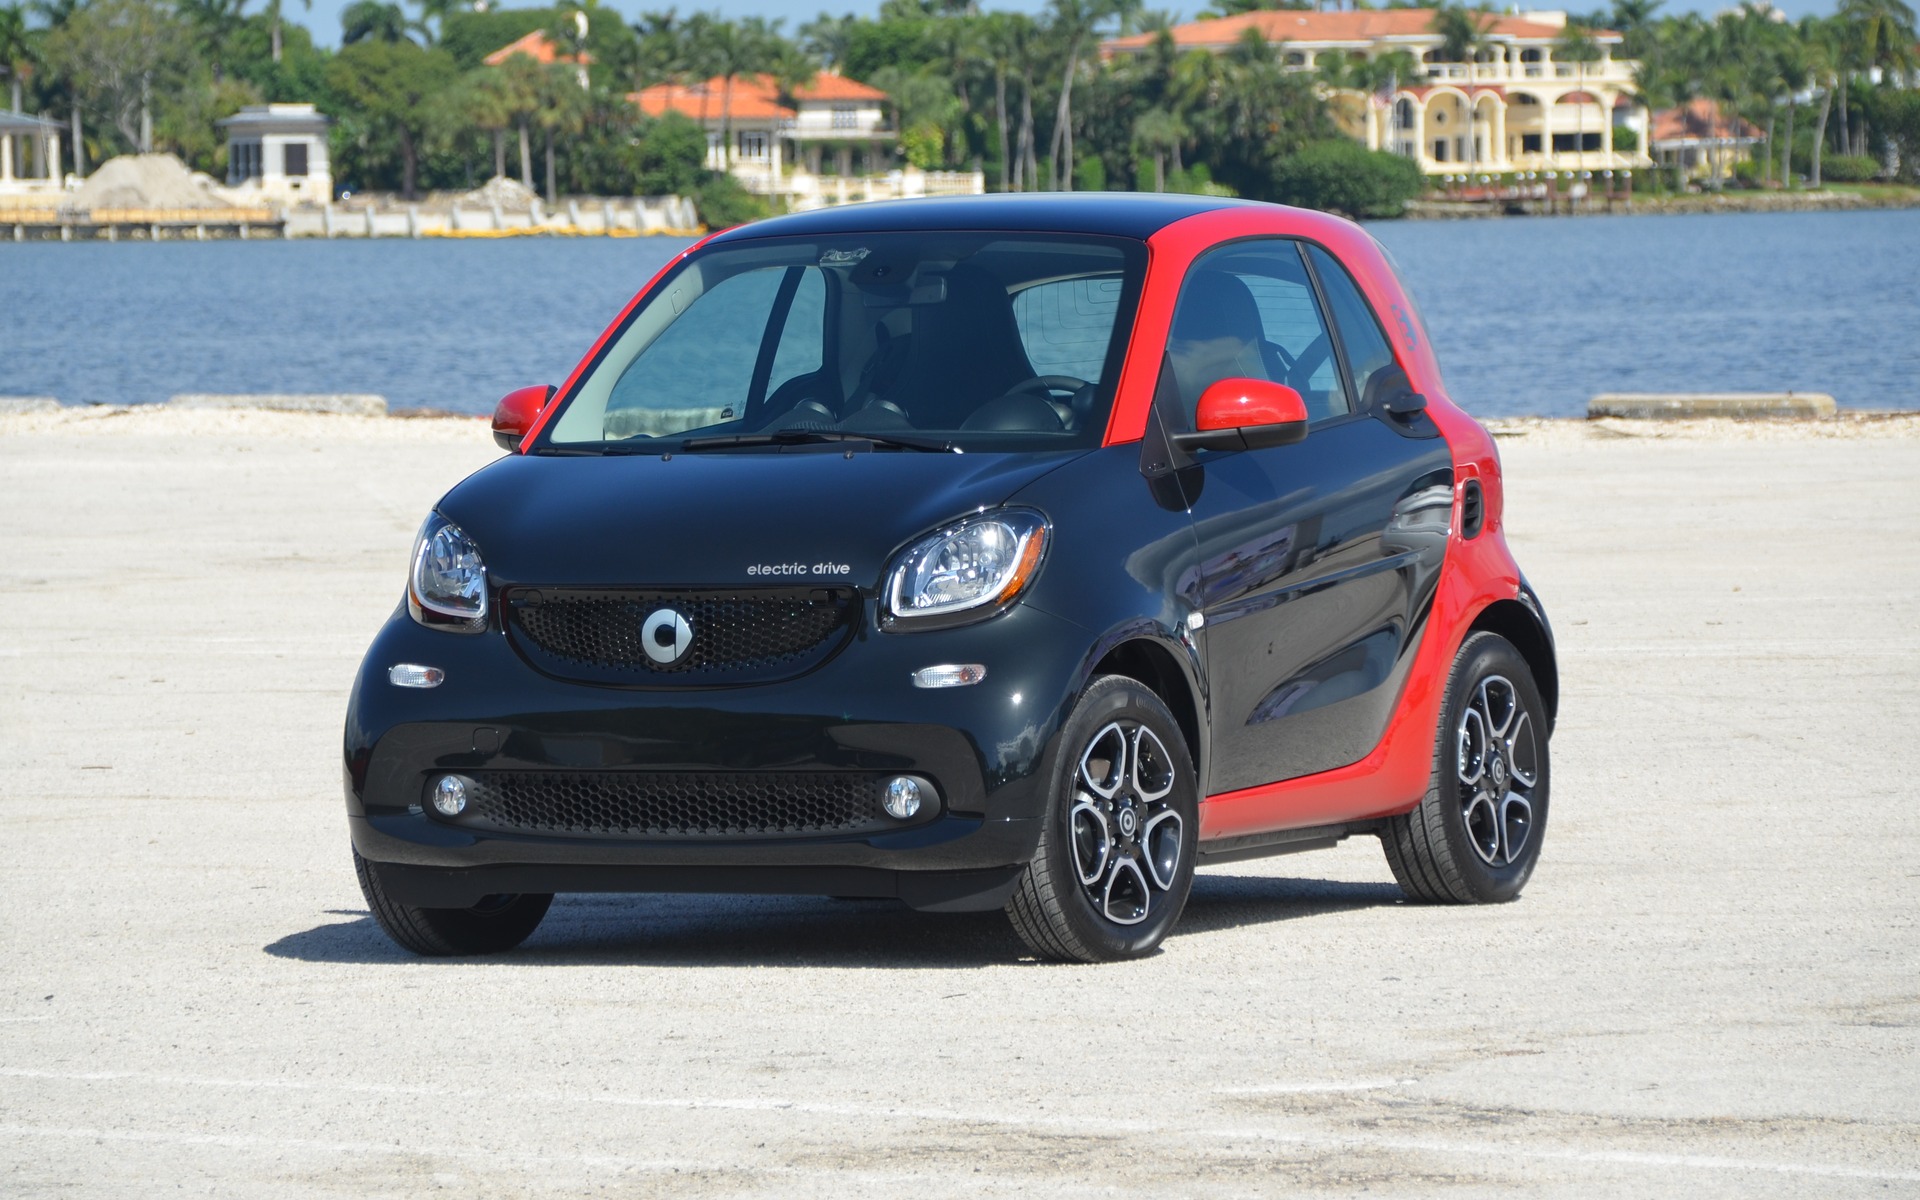 Smart Fortwo Electric